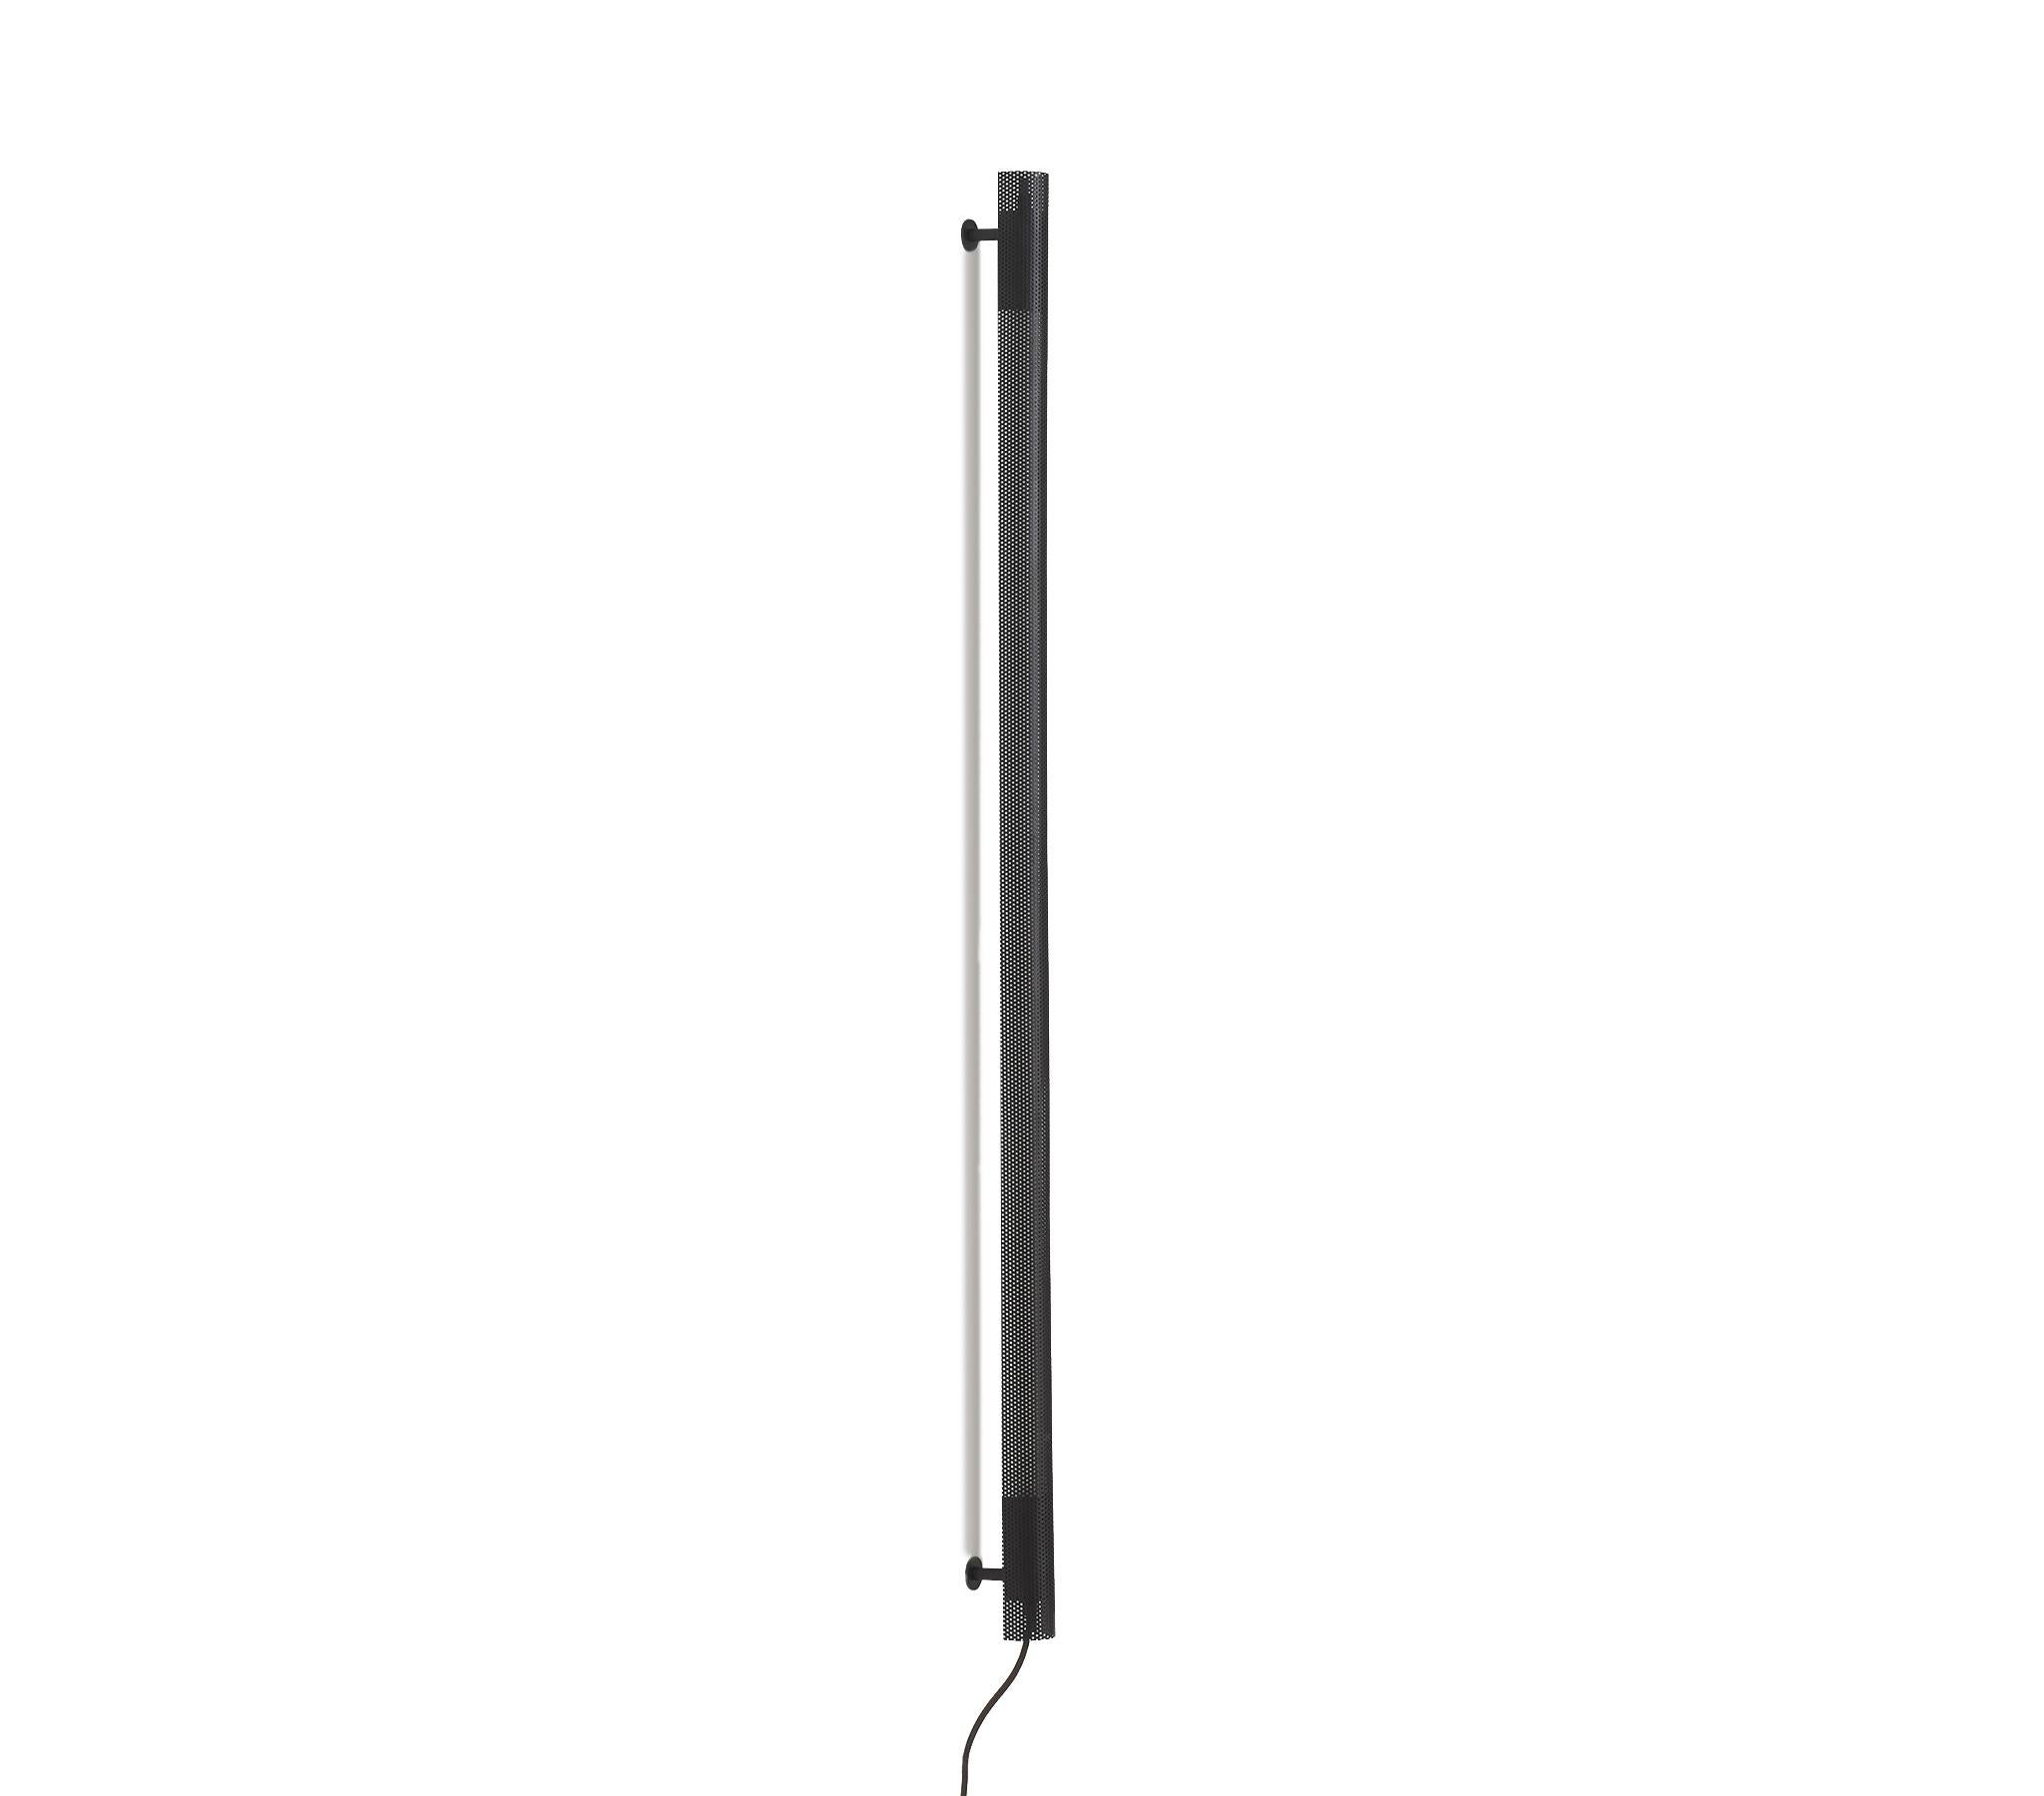 Radent wall lamp is based on a standard LED light and is a slim radiant linear wall lamp. The radent wall lamp is available in two sizes with a black, white or brass finish.